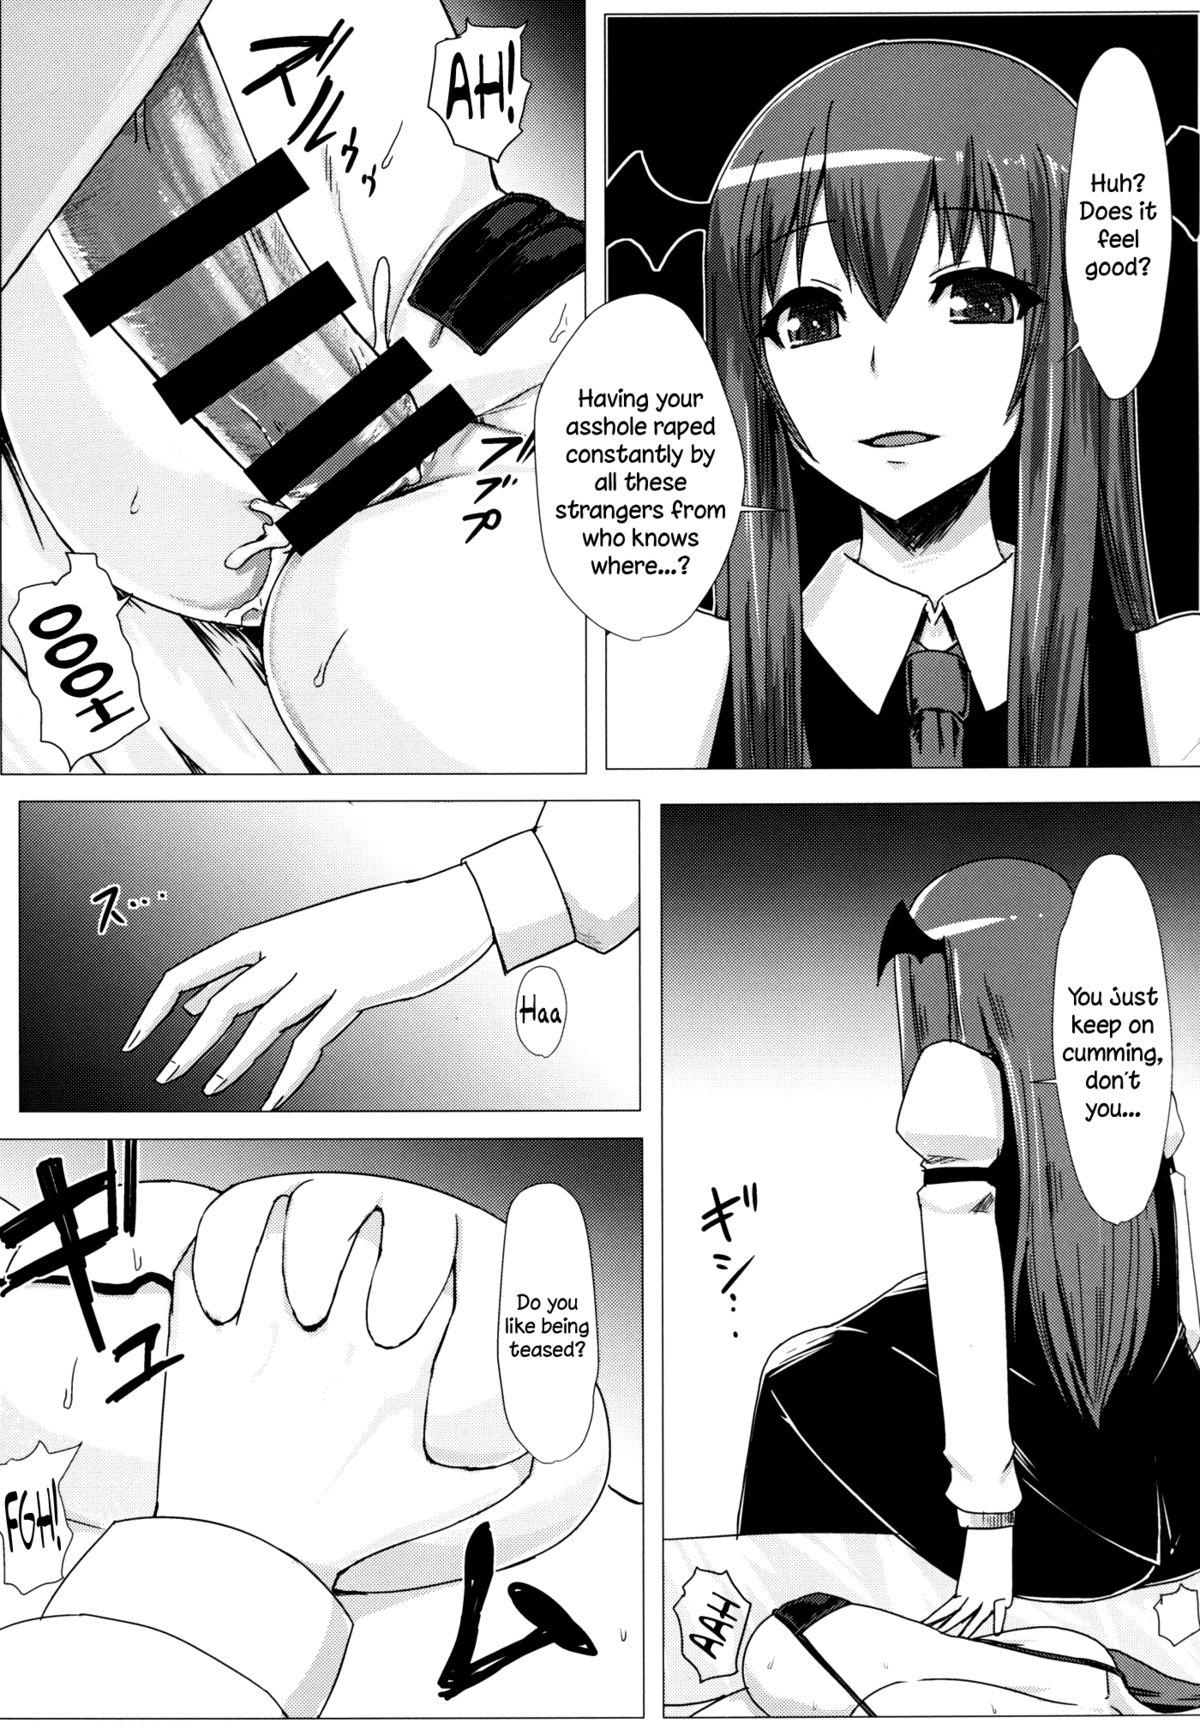 Sharing Shiri Pache Pache | Ass Patchy Patchy - Touhou project Boots - Page 6